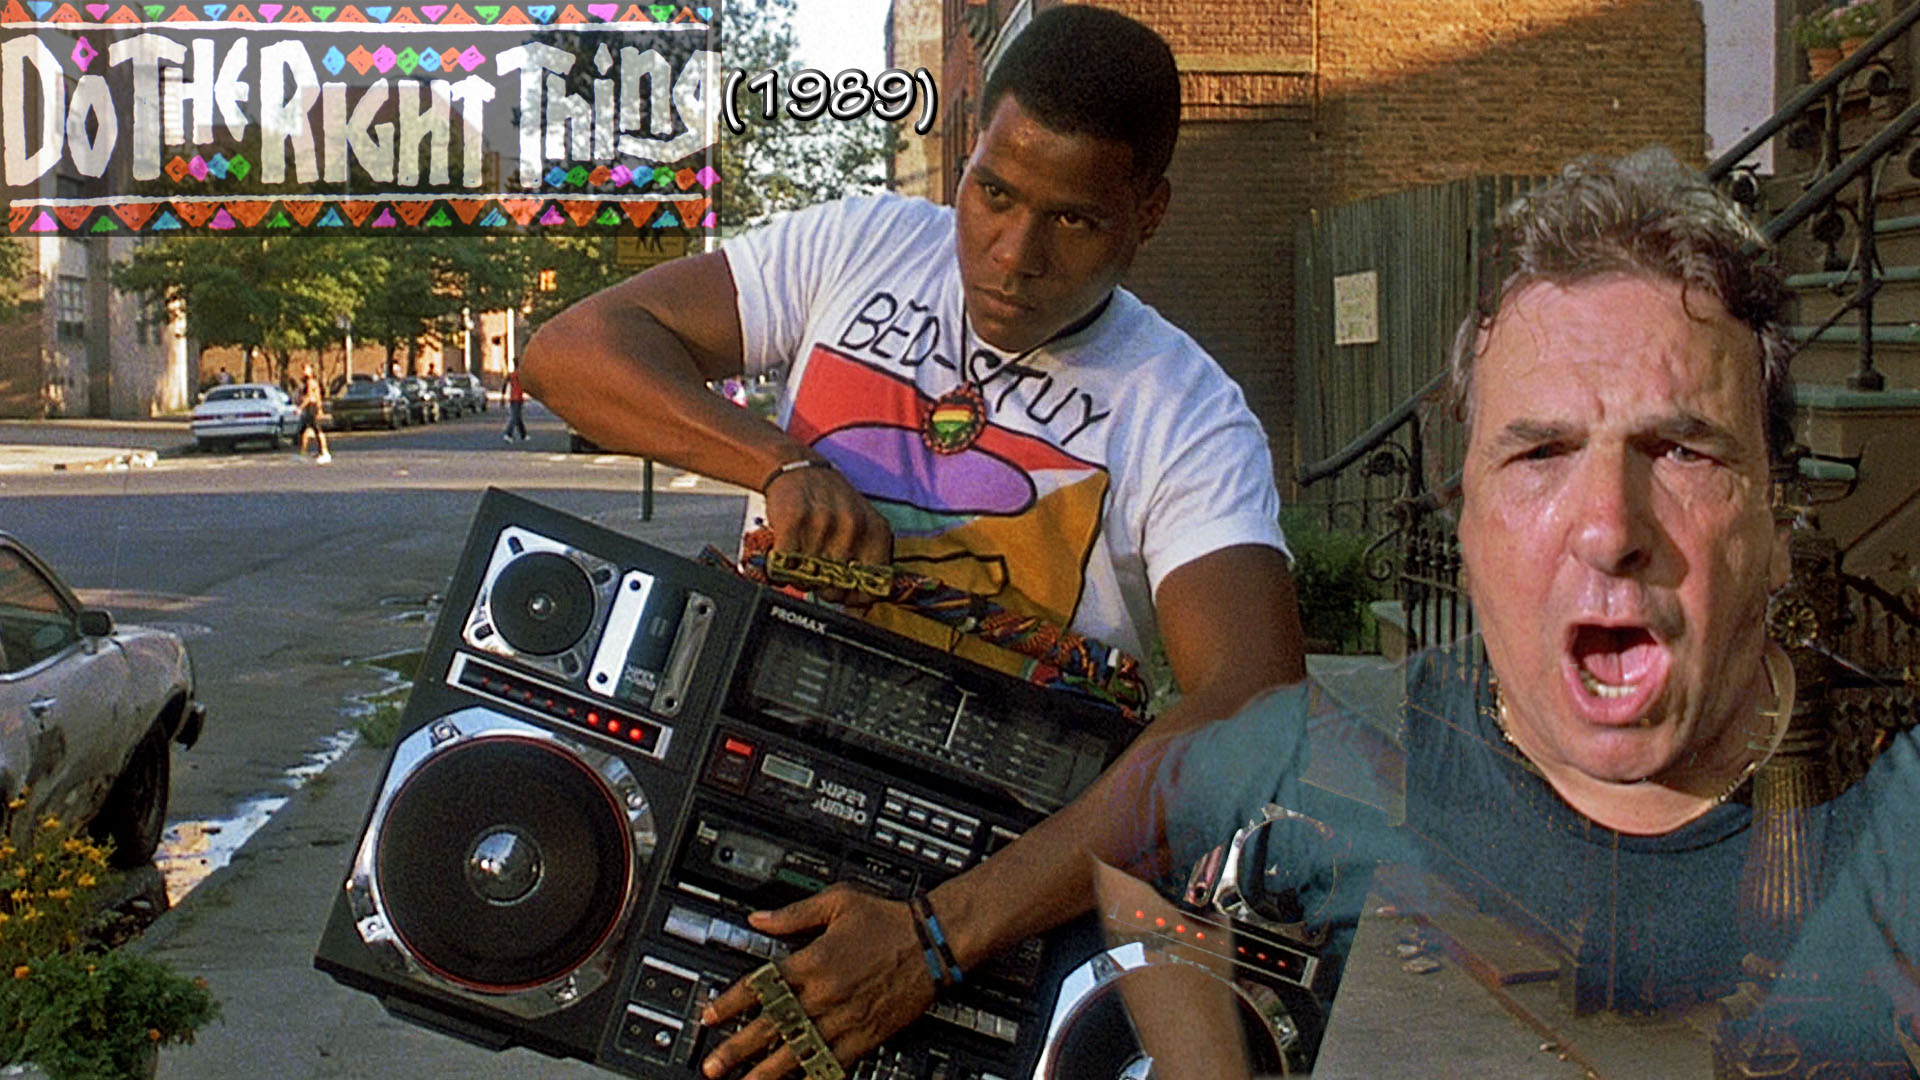 Do The Right Thing Wallpapers